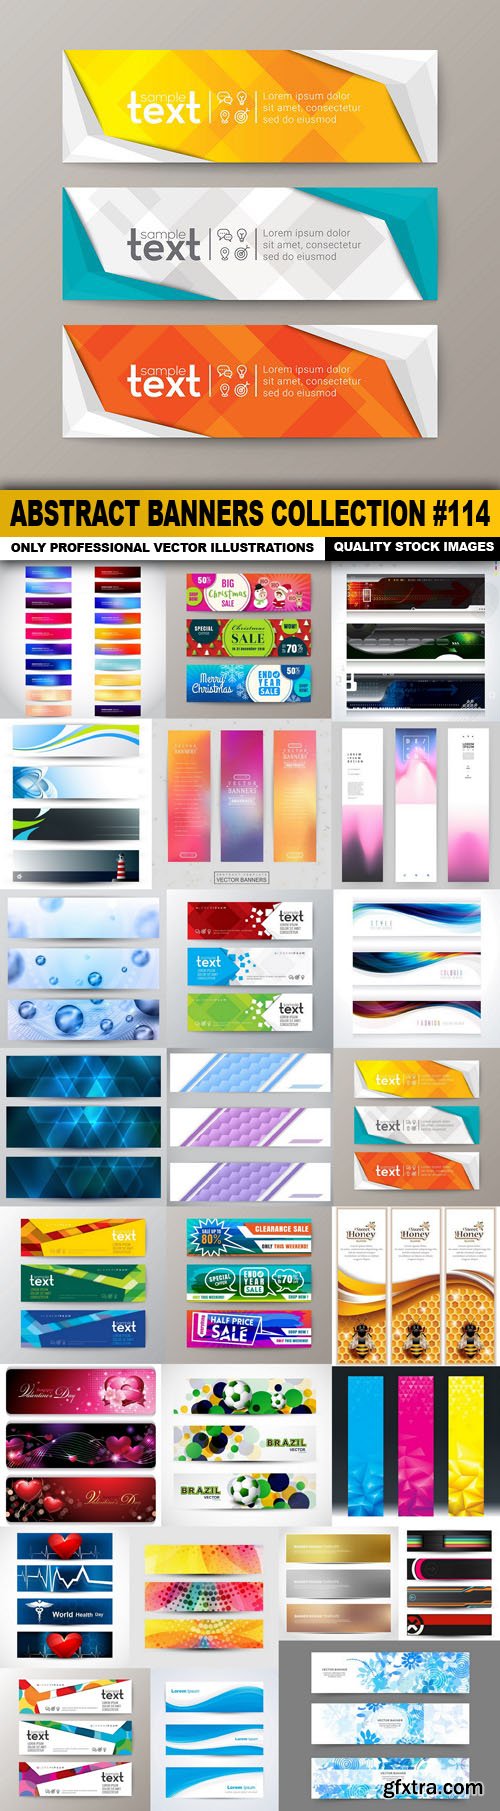 Abstract Banners Collection #114 - 25 Vectors